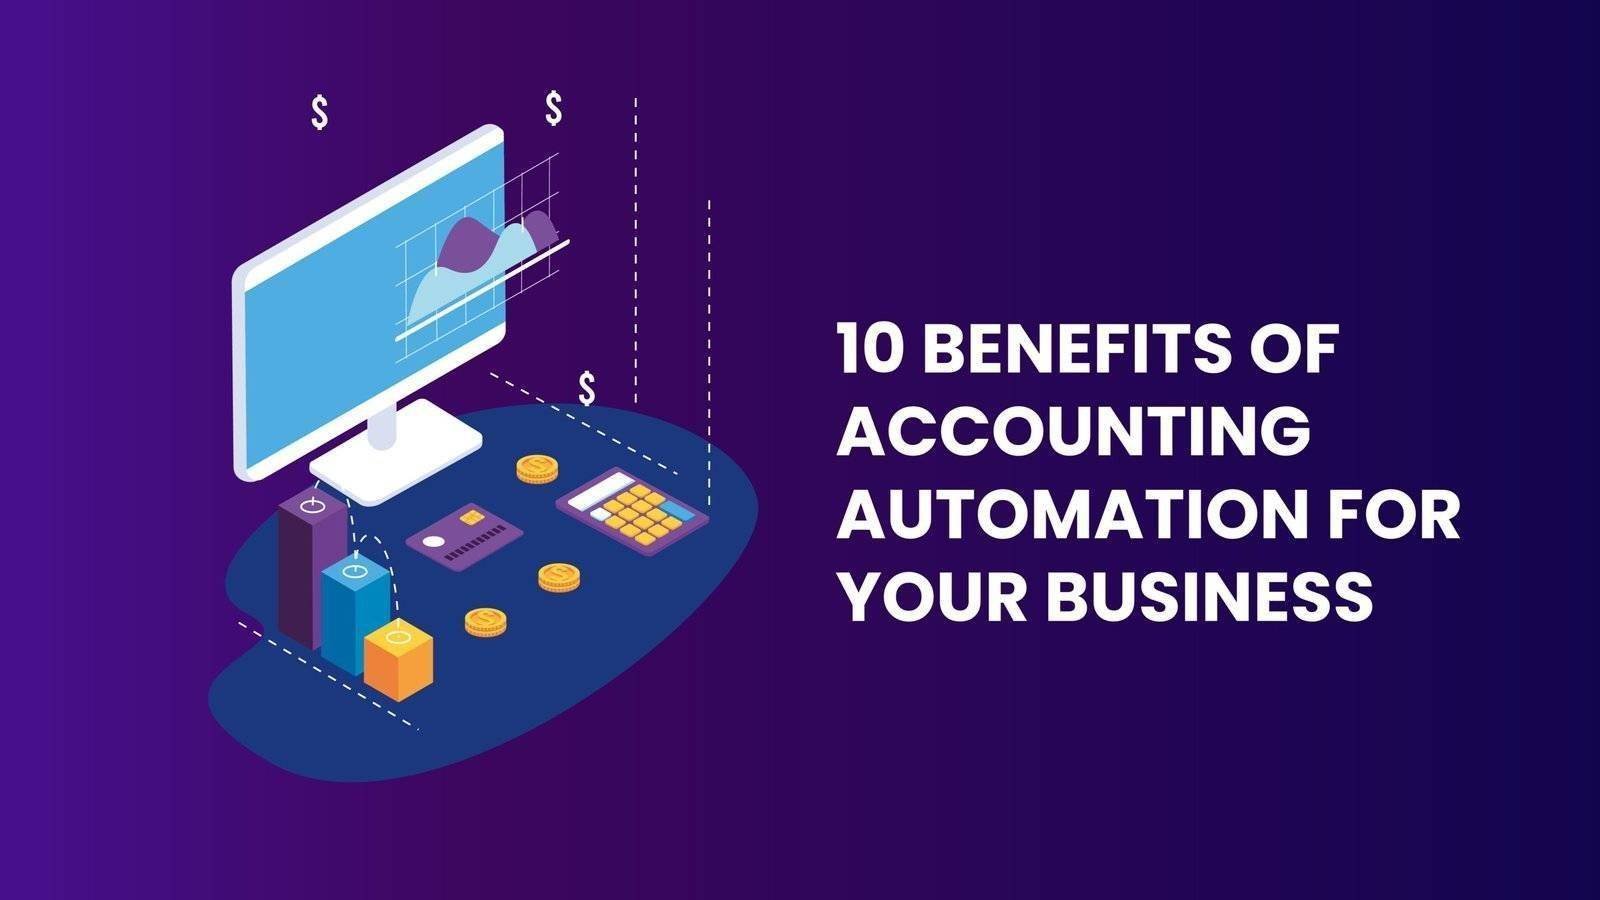 10 Benefits of Accounting Automation for Your Business